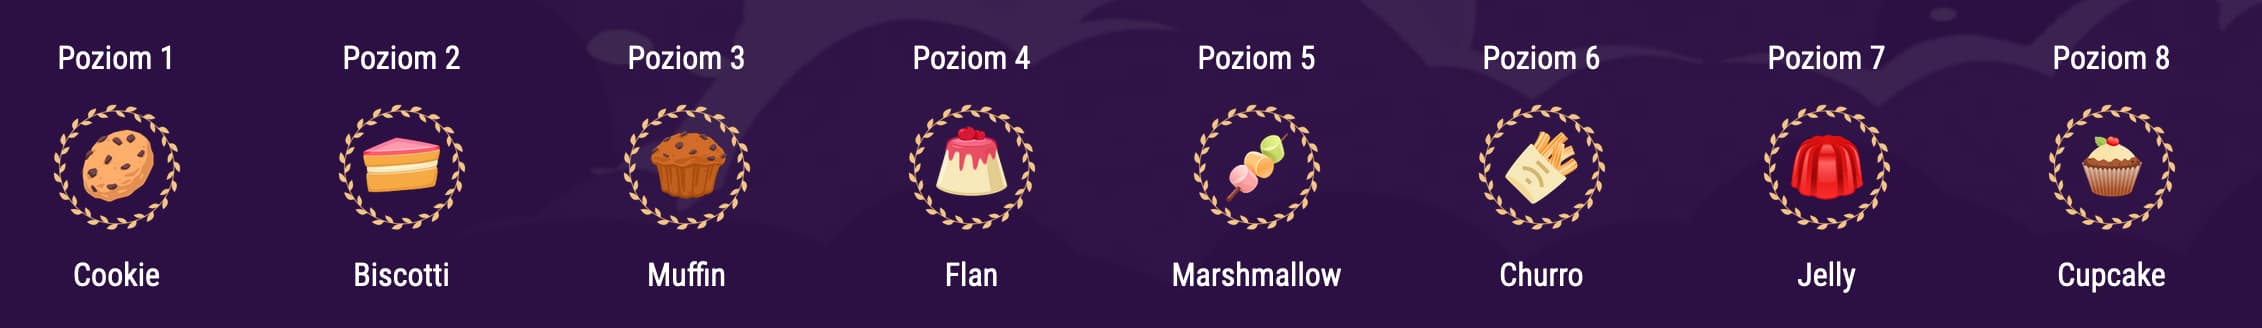 cookie casino loyalty points